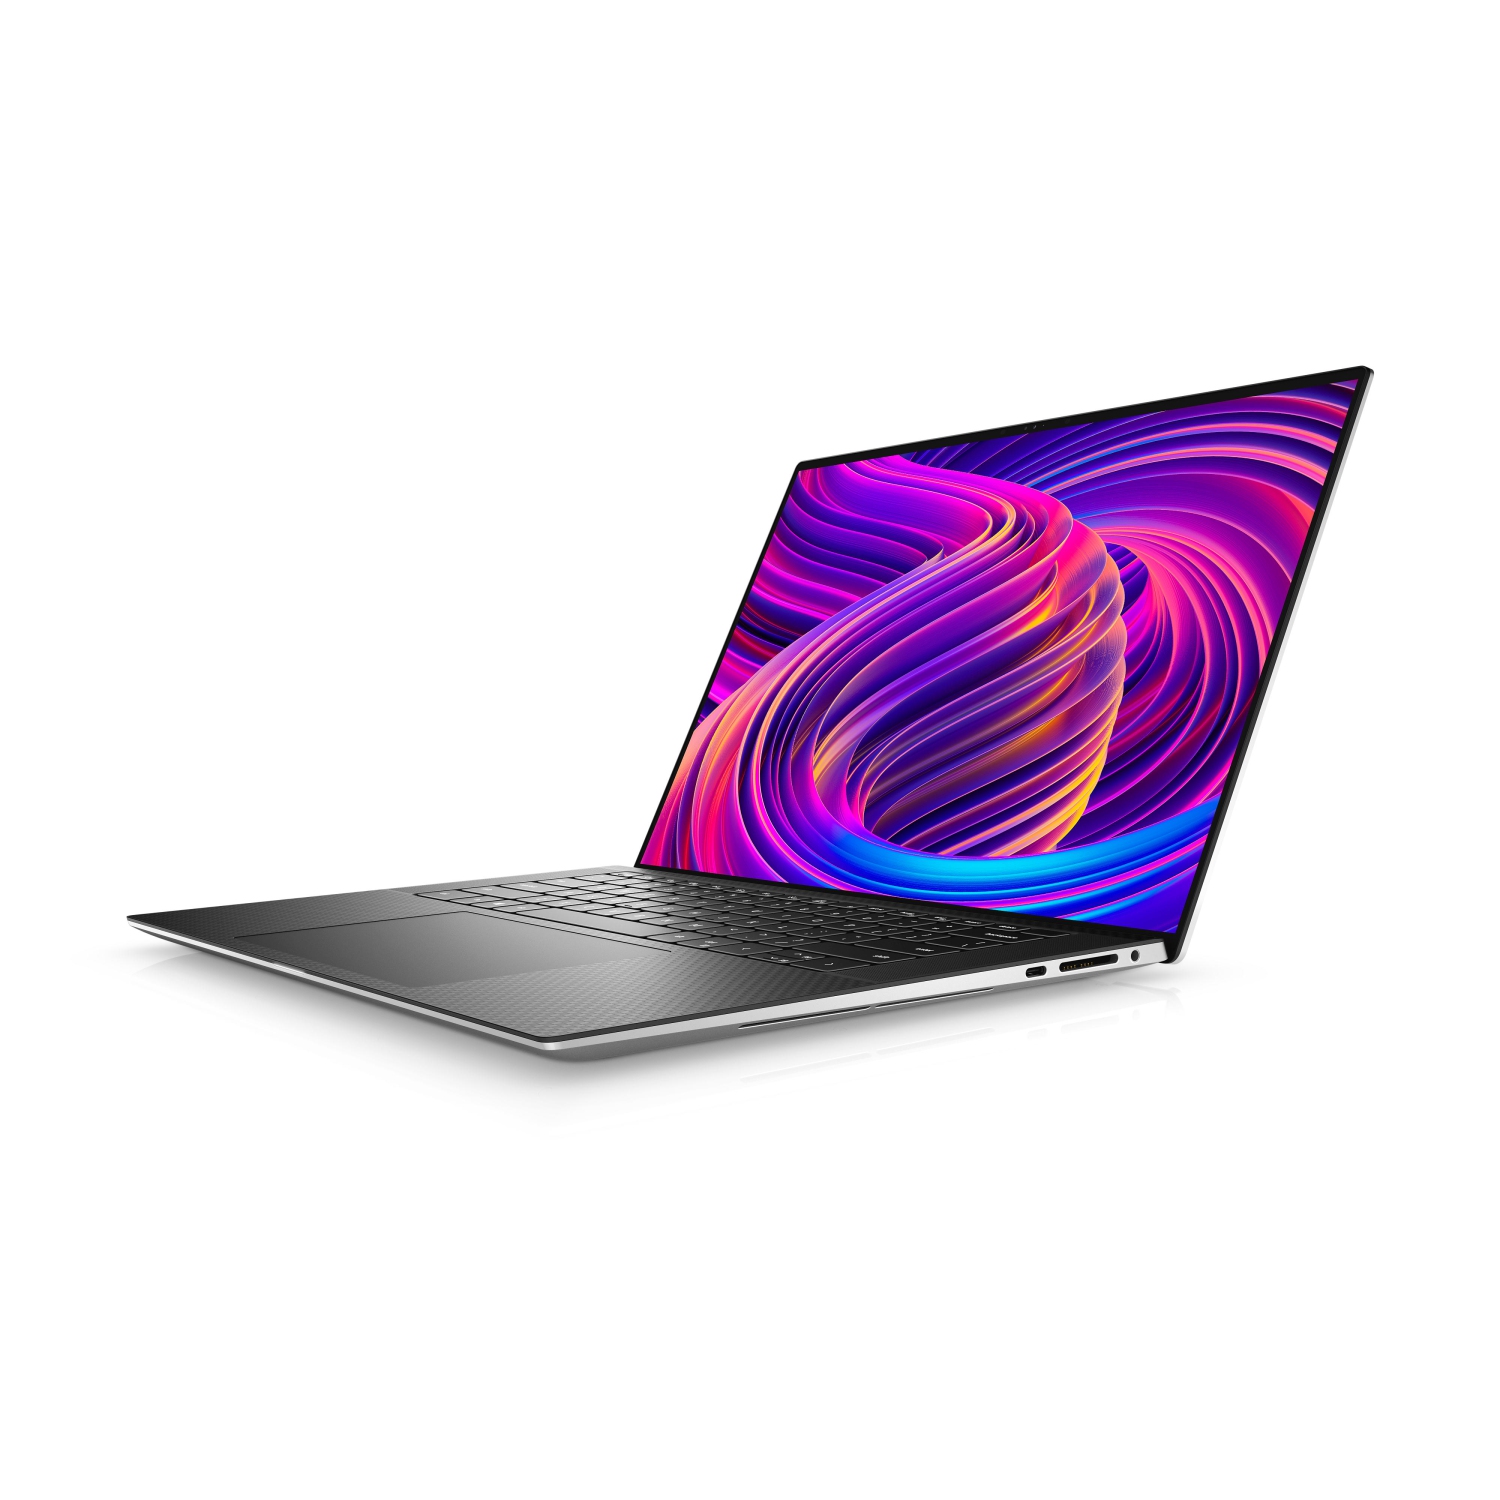 Refurbished (Excellent) - Dell XPS 15 9510 Laptop (2021), 15.6" 4K Touch, Core i7 - 512GB SSD - 32GB RAM - 3050 Ti, 8 Cores @ 4.6 GHz - 11th Gen CPU Certified Refurbished